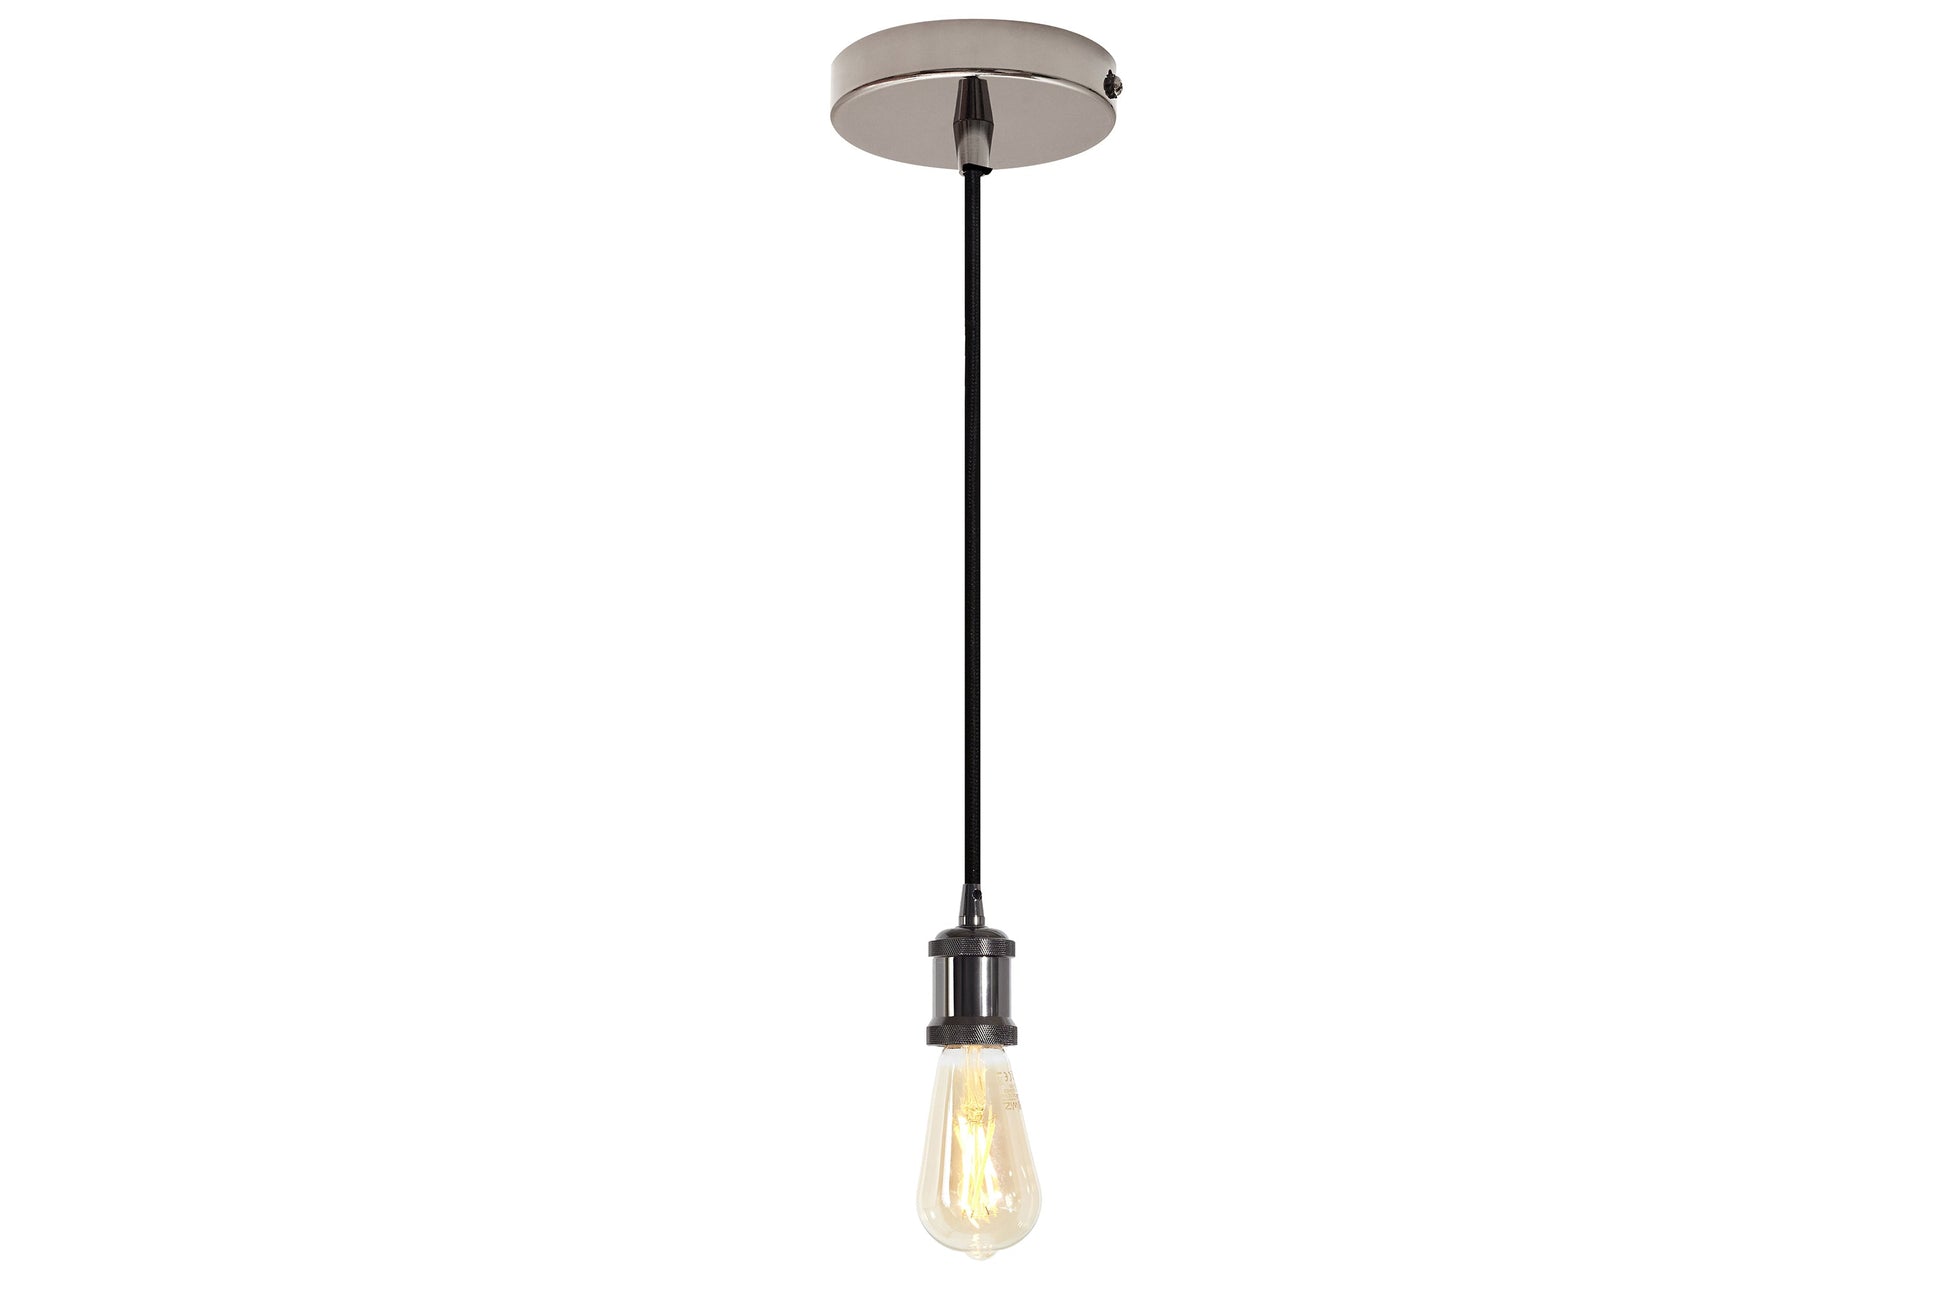 4lite WiZ Connected Decorative Single Lighting Pendant with ST64 Amber Coated Filament LED Smart Bulb - Blackened Silver - maplin.co.uk